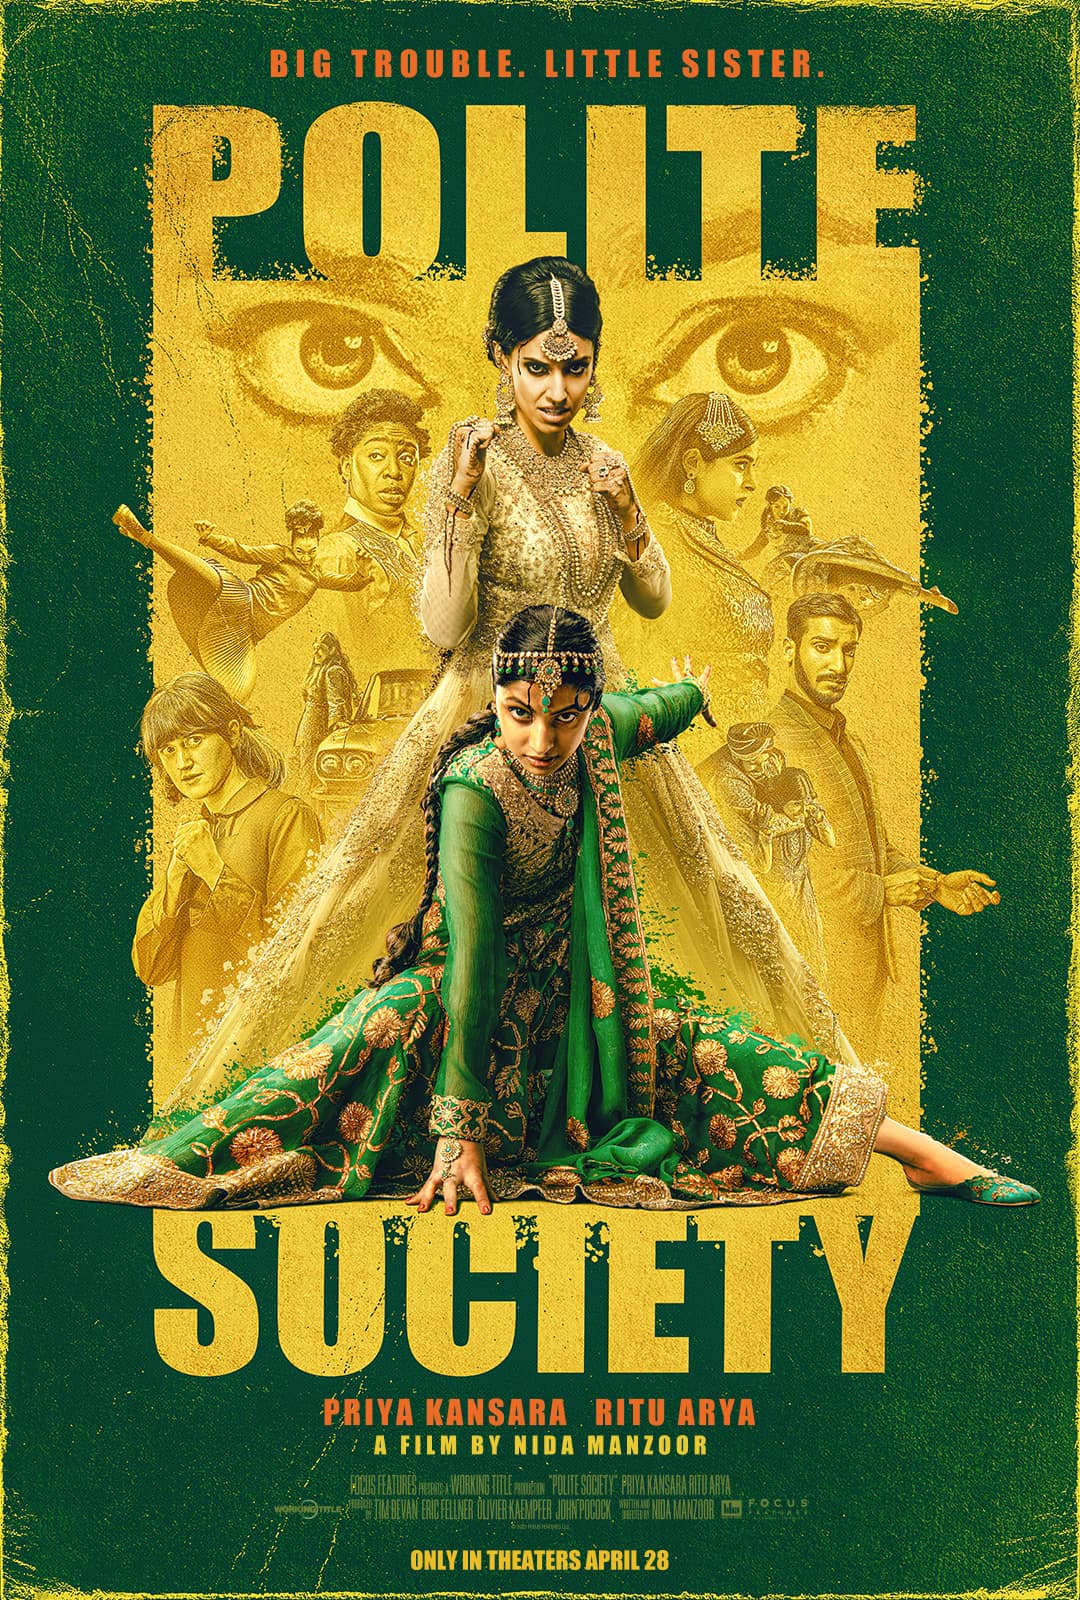 "Movie Poster," Polite Society, directed by Nida Manzoor